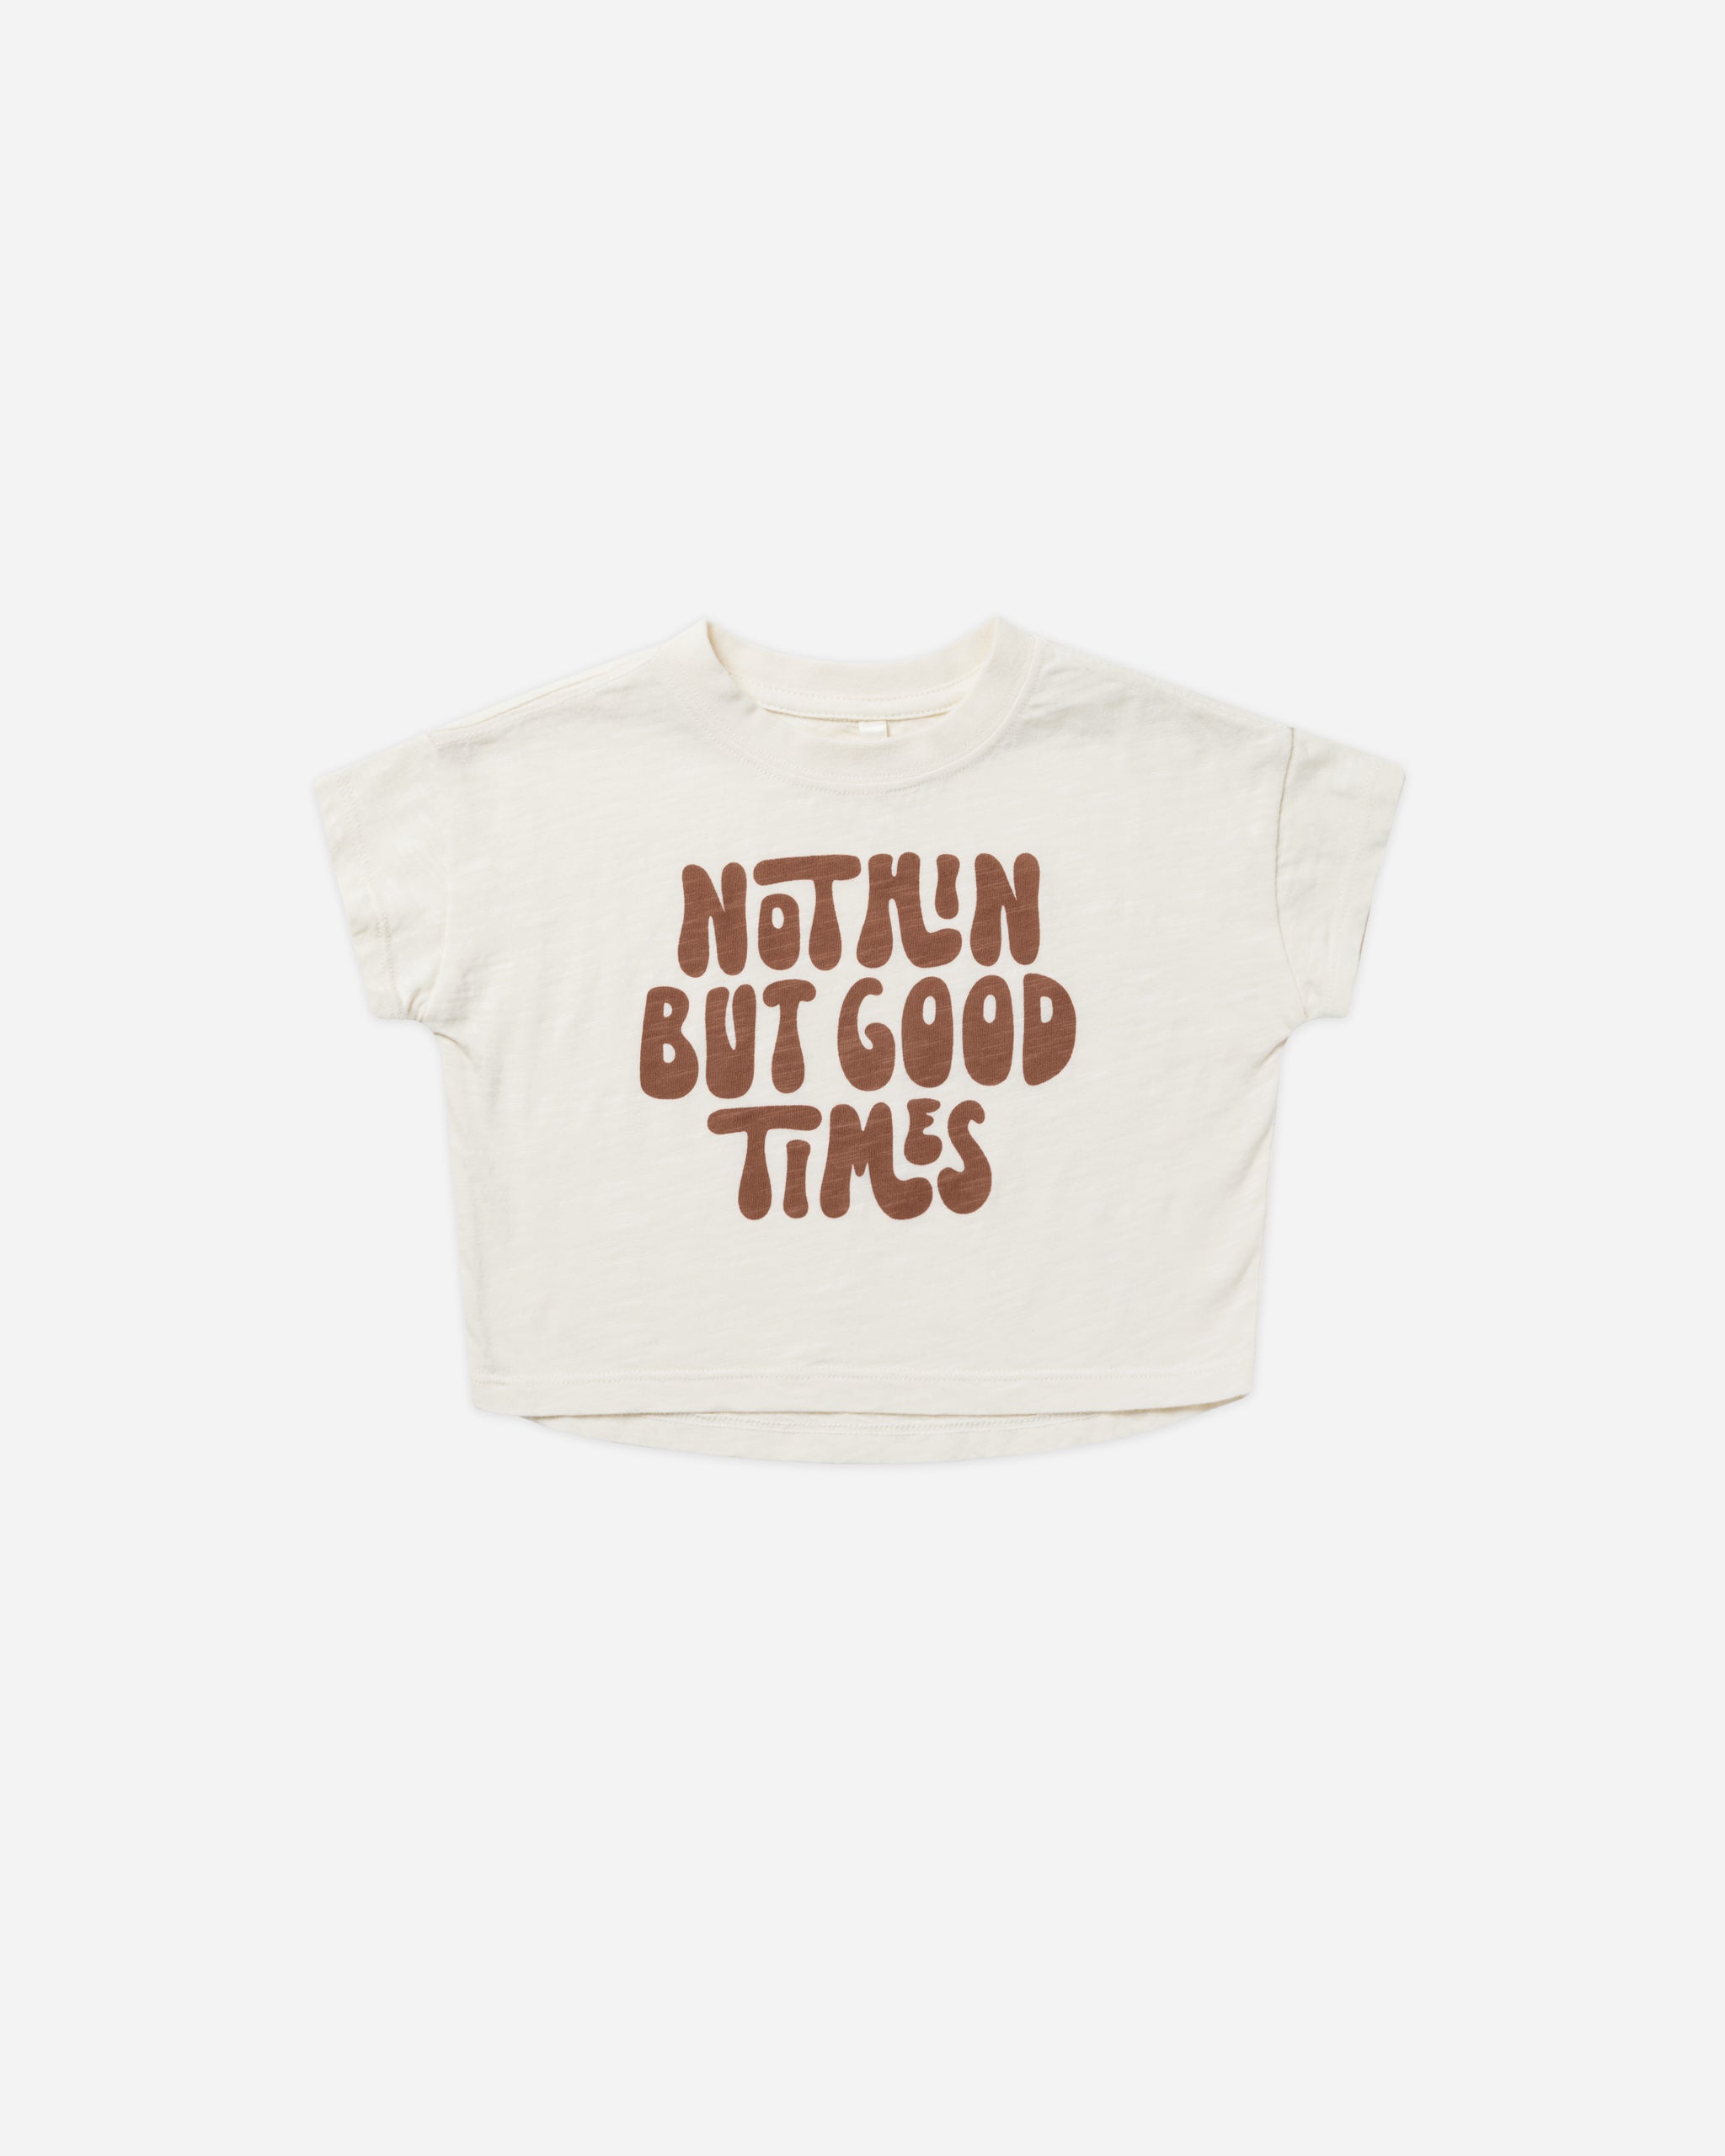 Boxy Tee || Good Times - Rylee + Cru | Kids Clothes | Trendy Baby Clothes | Modern Infant Outfits |